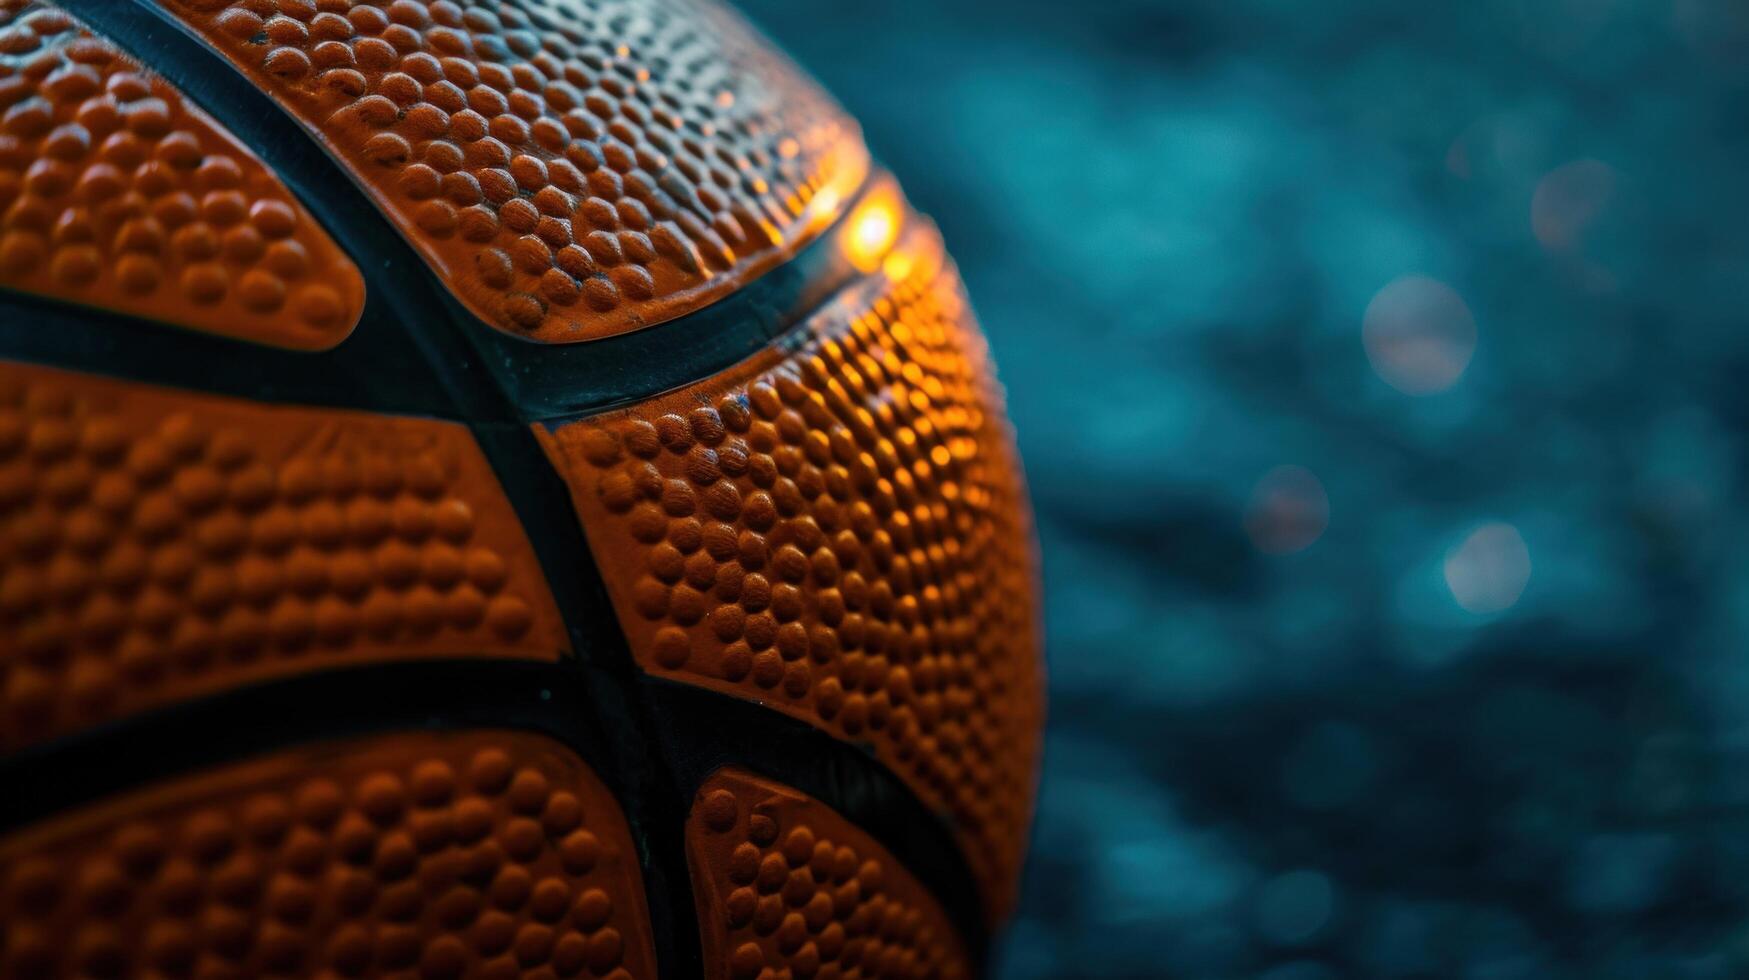 AI generated basketball advertisment background with copy space photo